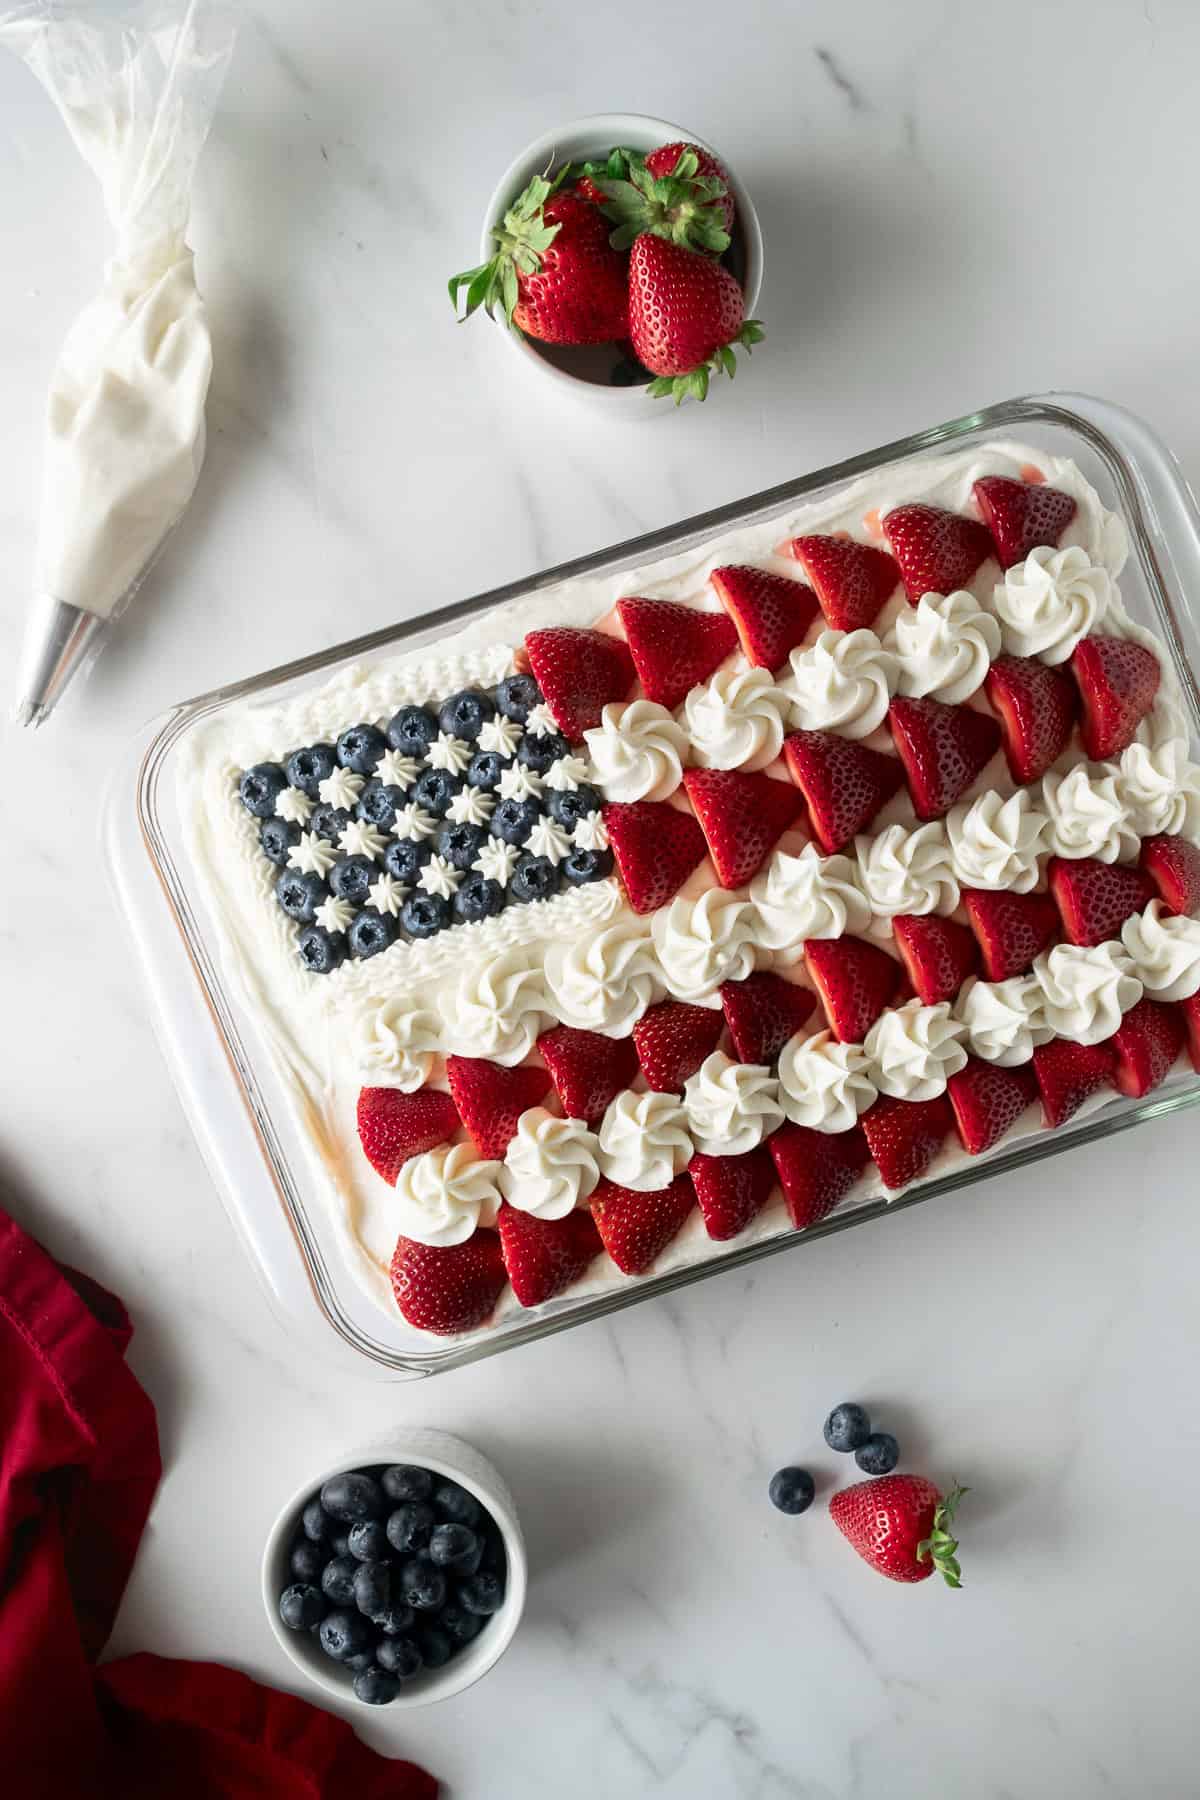 american flag cake in a baking pan topped with vanilla frosting, strawberries, and blueberries.